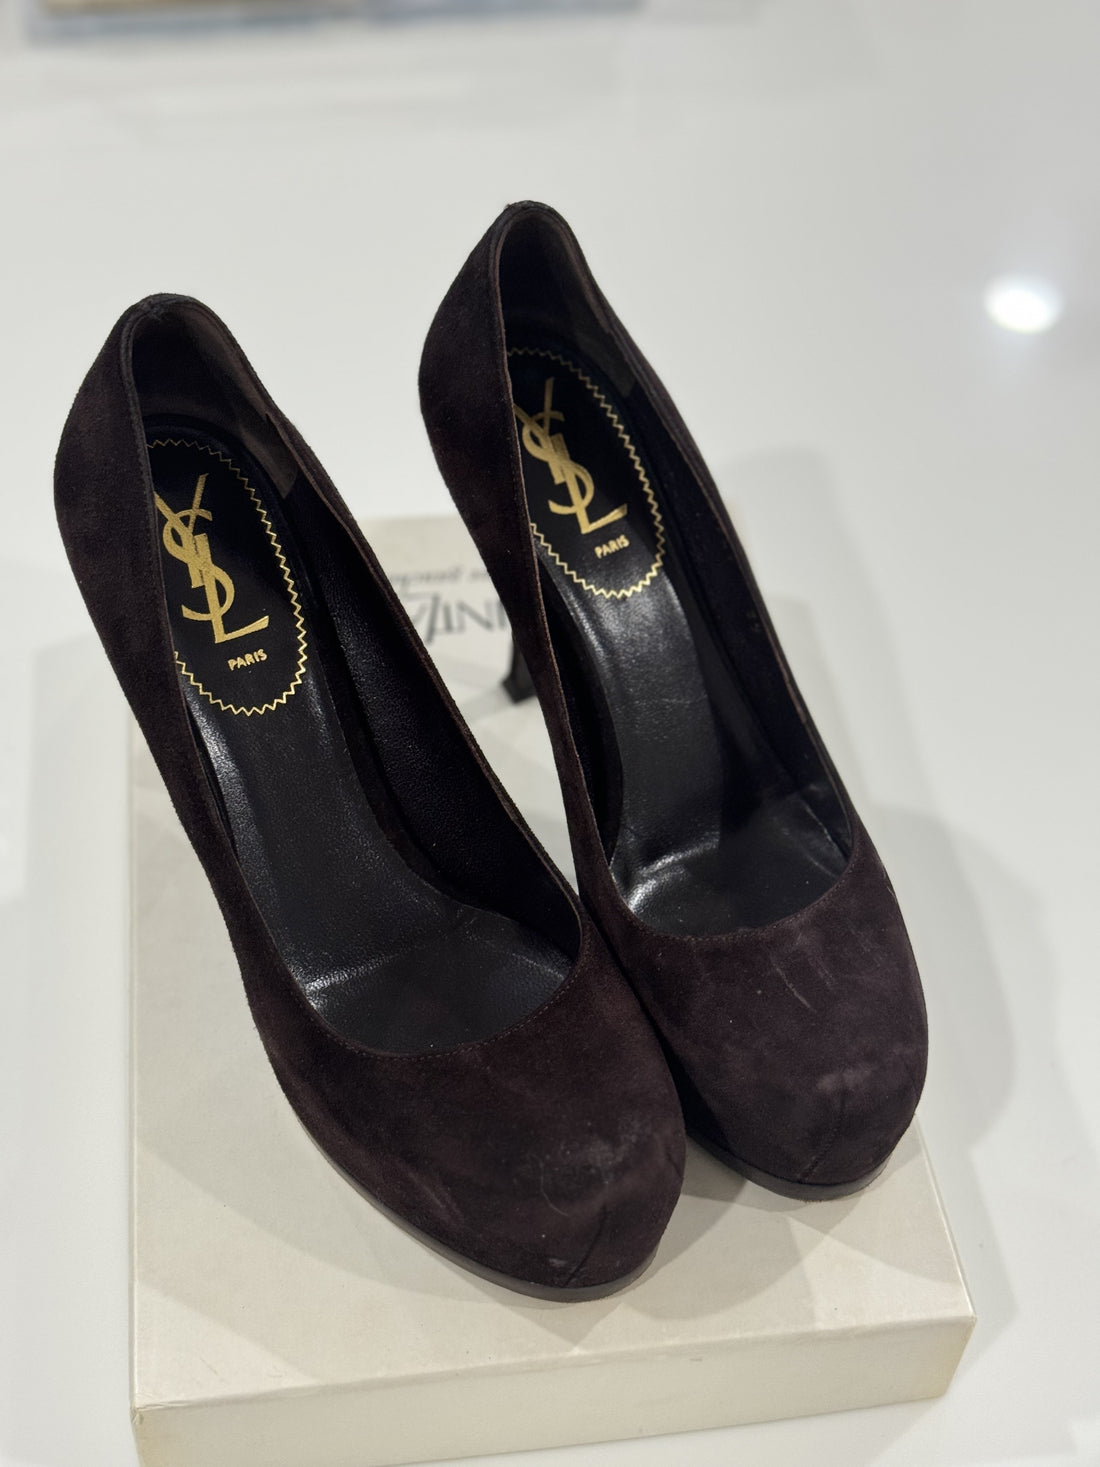 YSL Tribtoo Suede Chocolate Brown Pumps- size 39